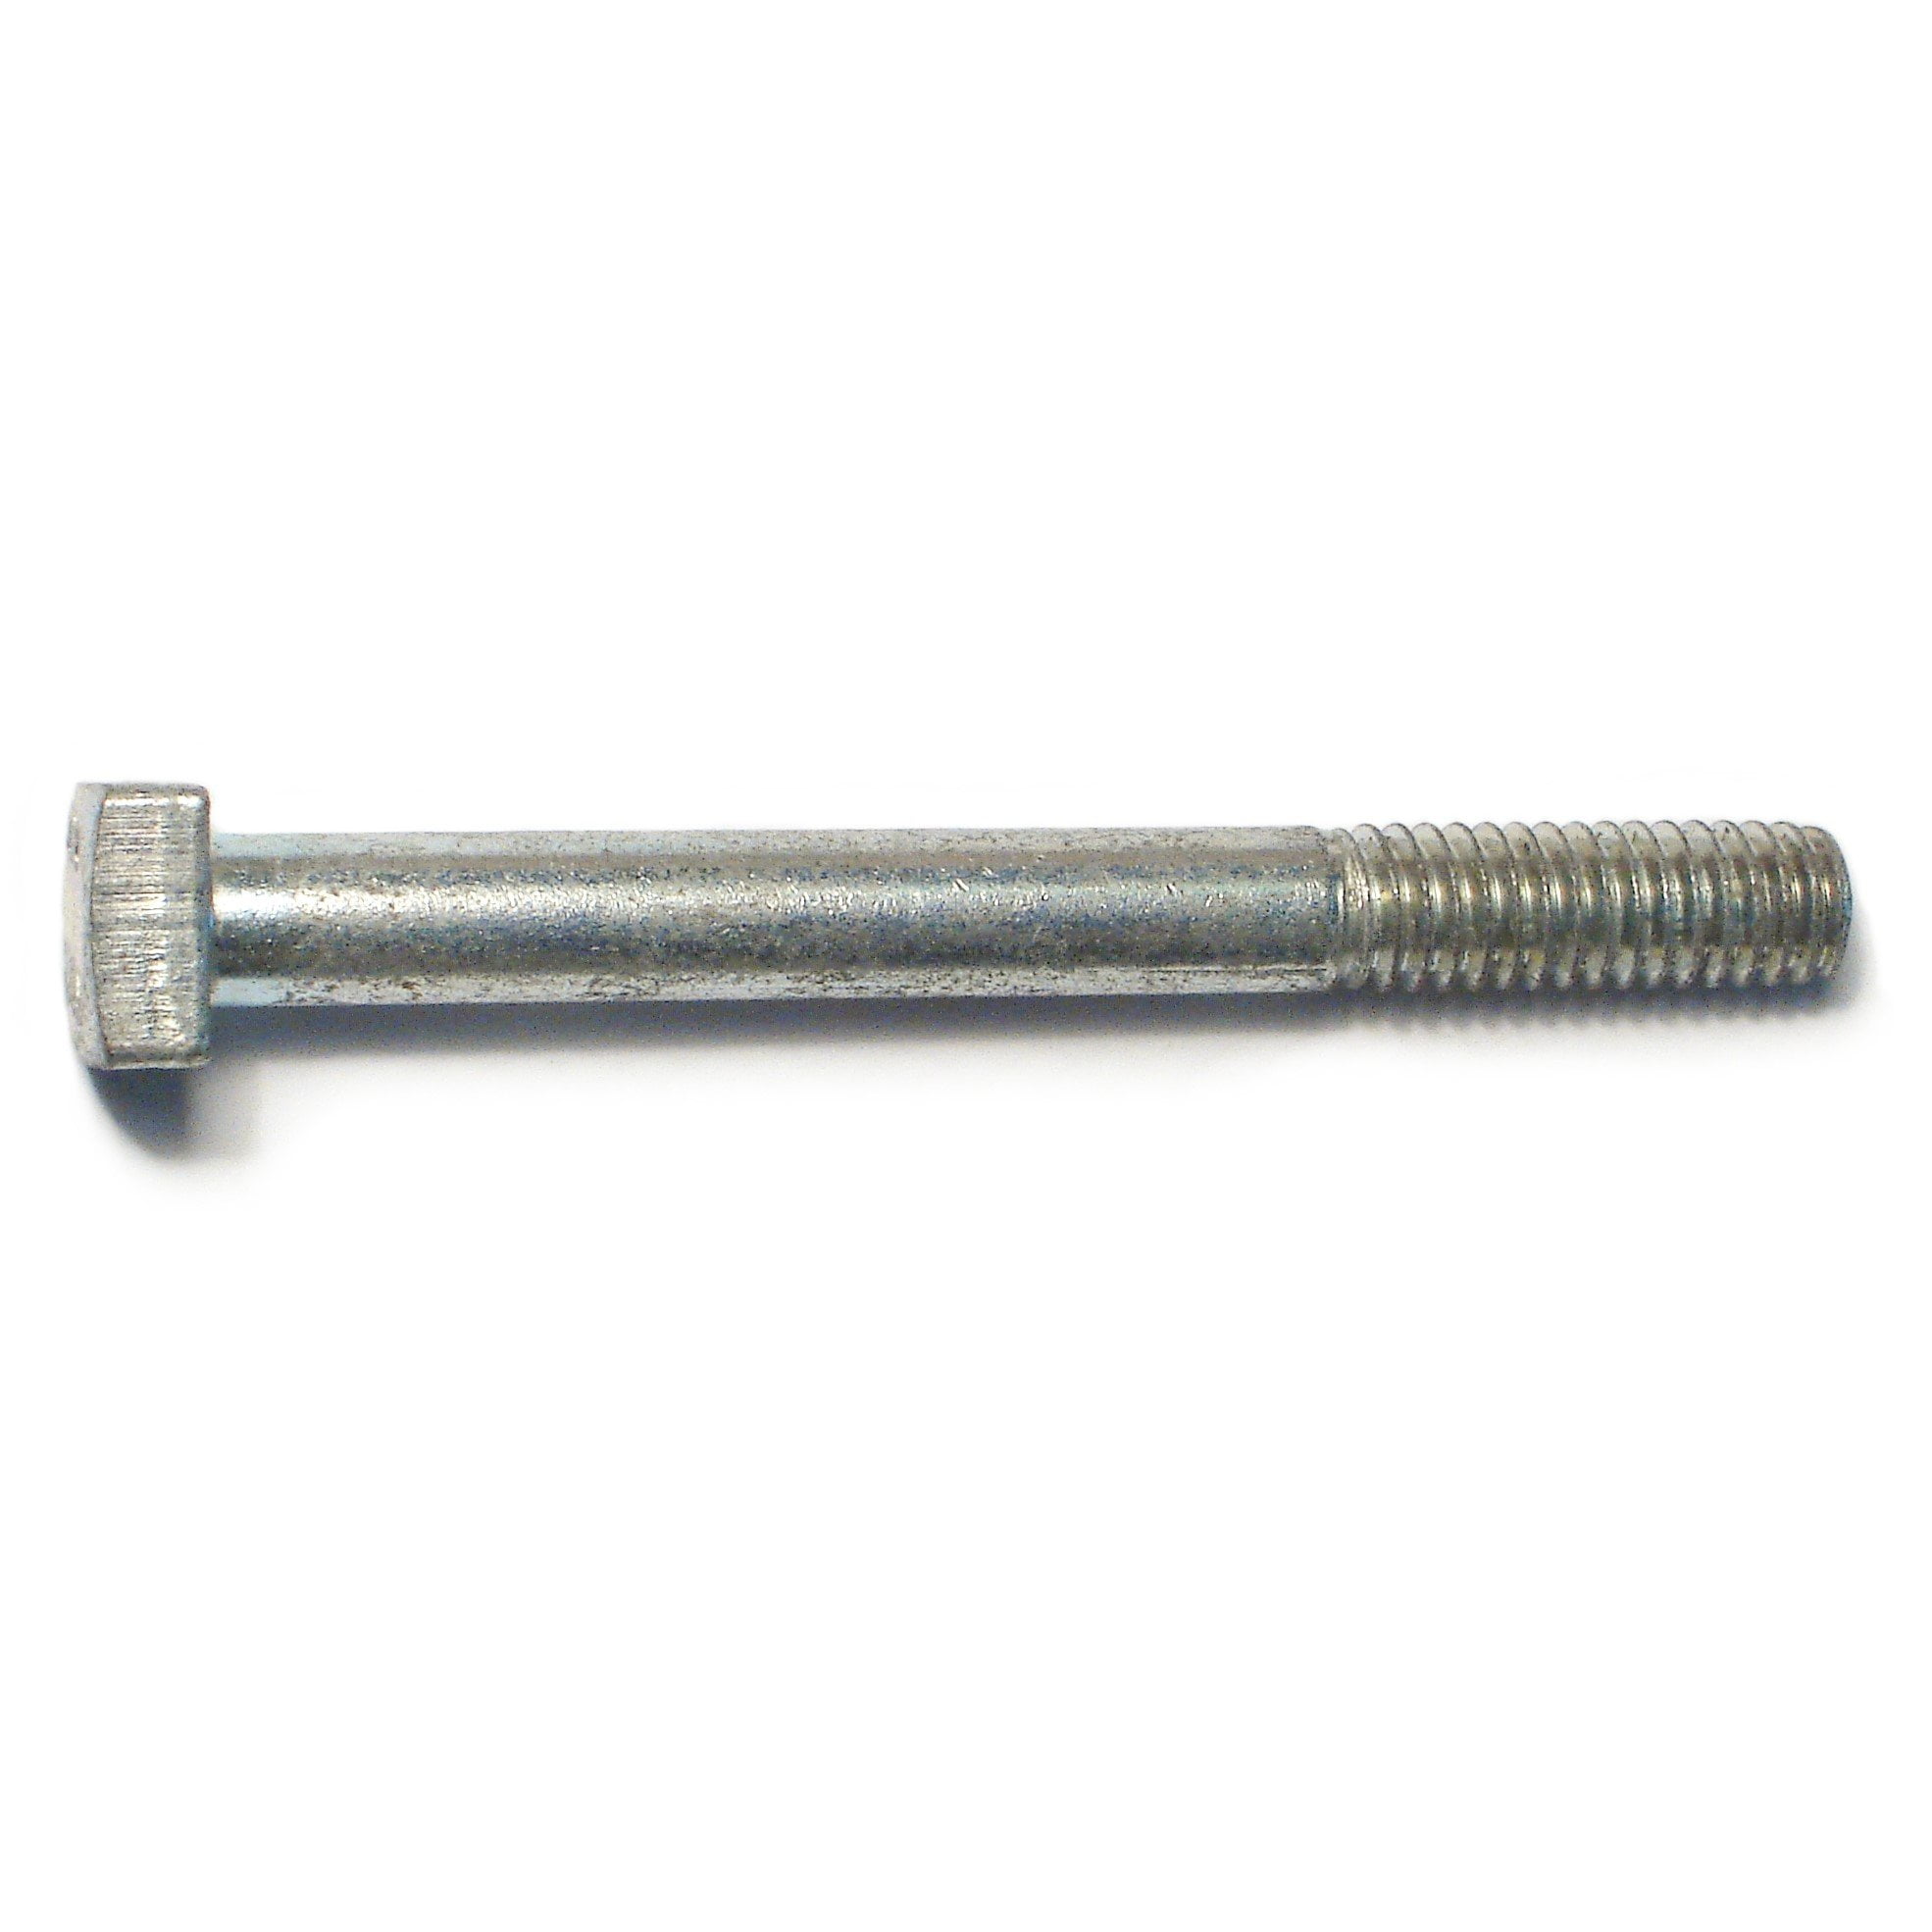 Hard-to-Find Fastener 014973312046 Square Head Bolts Piece-10 5/16-18 x 2-1/2 